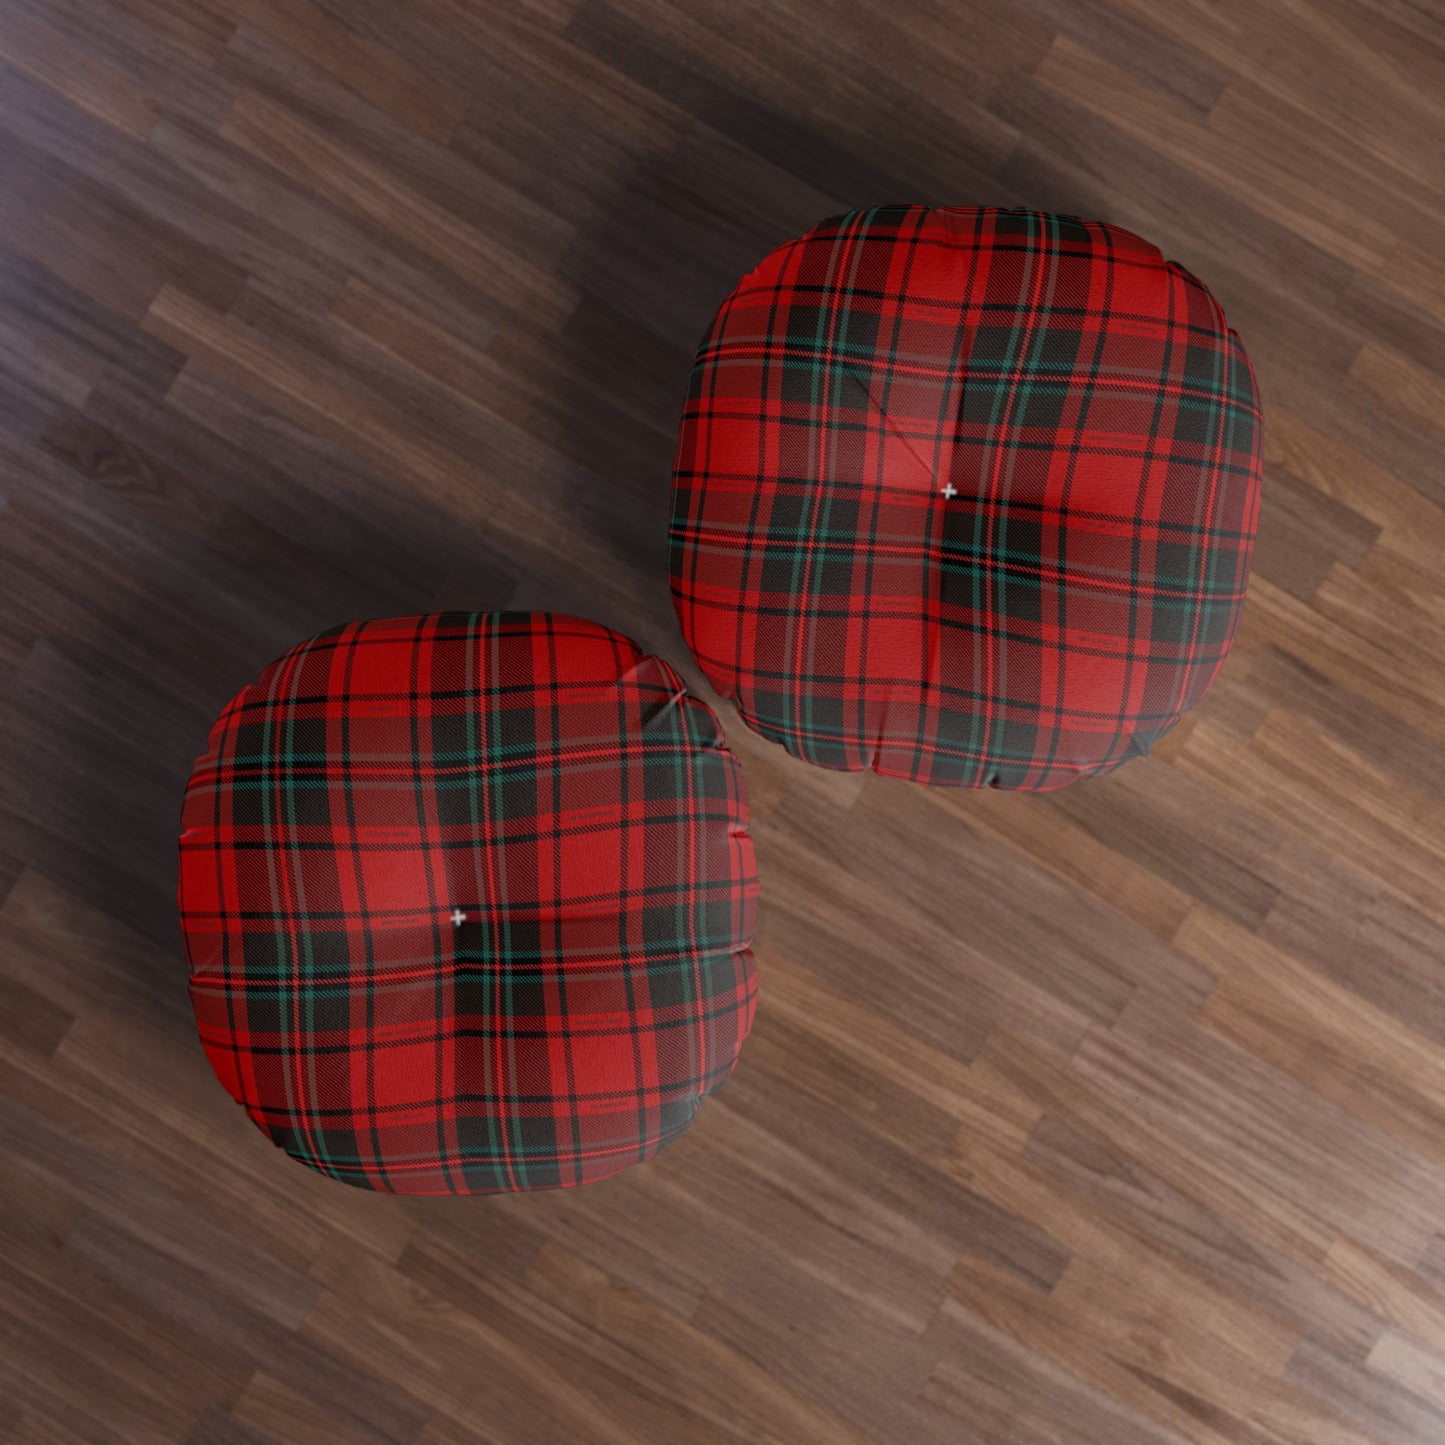 Merry Movies Plaid - Tufted Round Floor Pillow